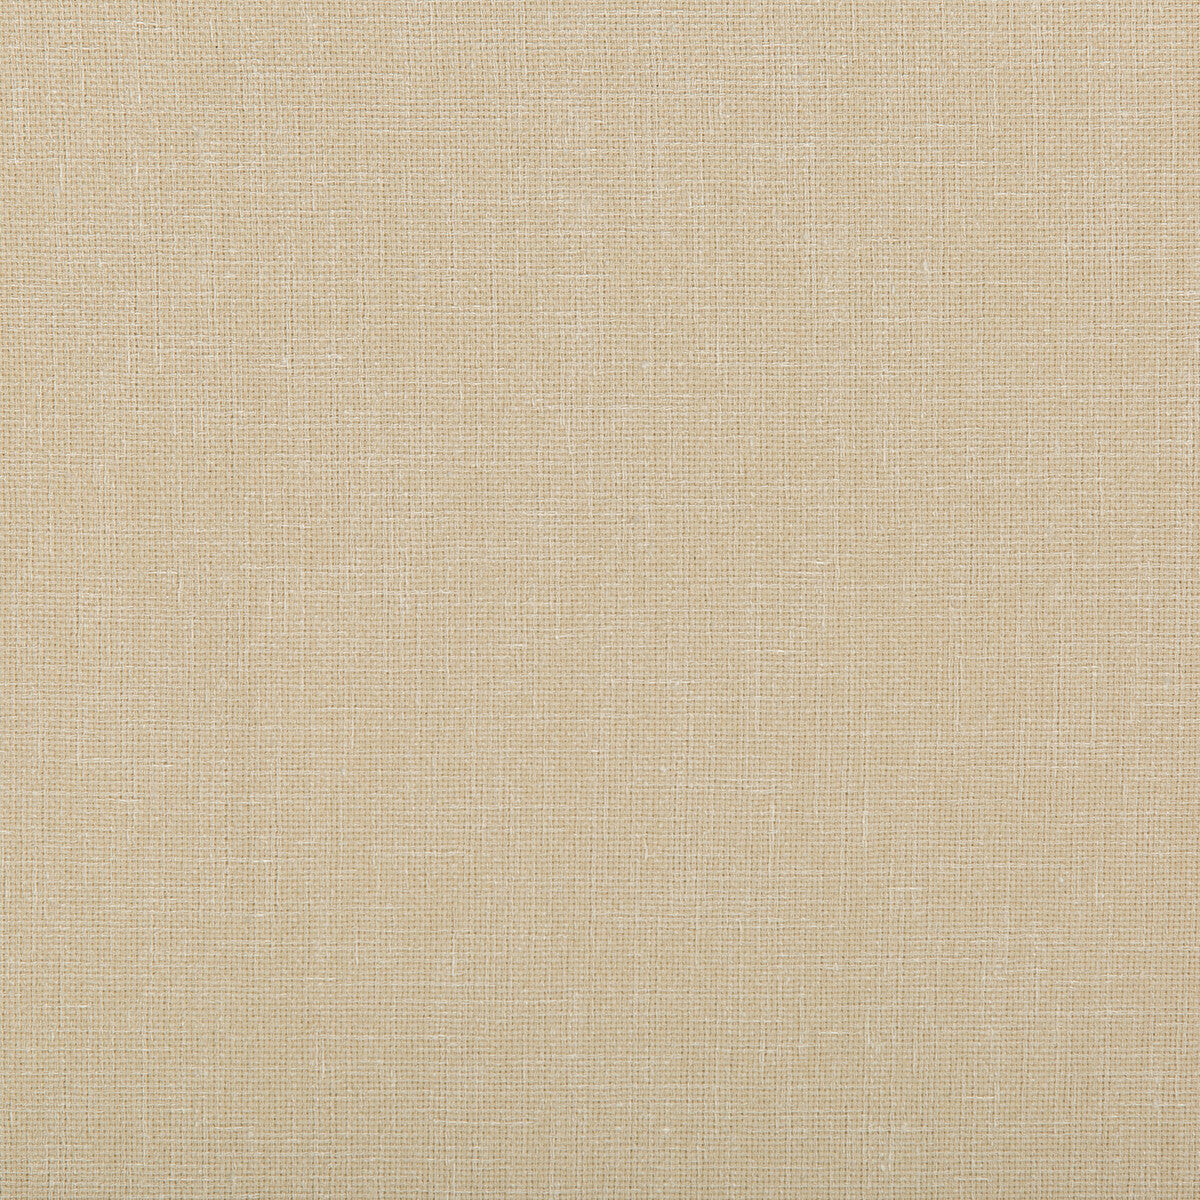 Kravet Contract fabric in 4644-1 color - pattern 4644.1.0 - by Kravet Contract